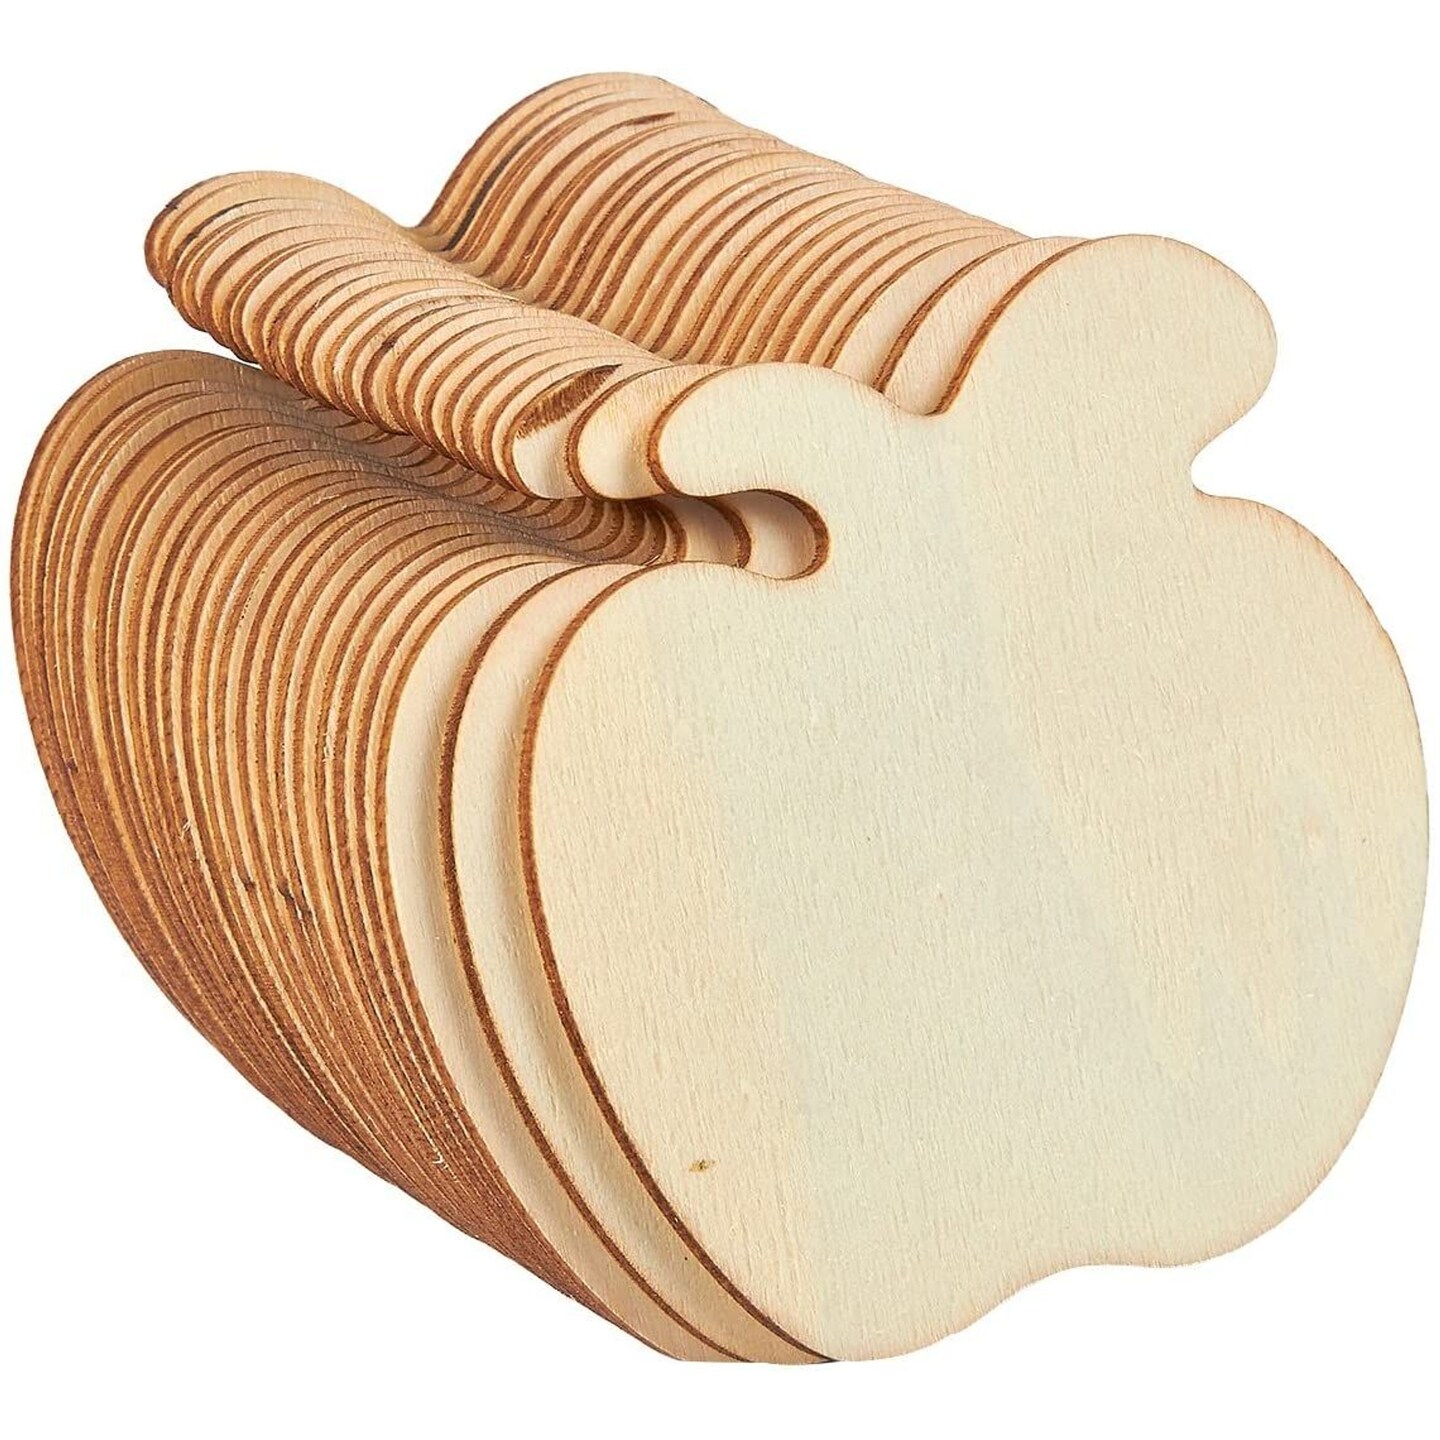 24 Pack Apple Shaped Unfinished Wood Cutouts for Crafts, Classroom  Supplies, DIY Projects (3.5 x 3.5 In)